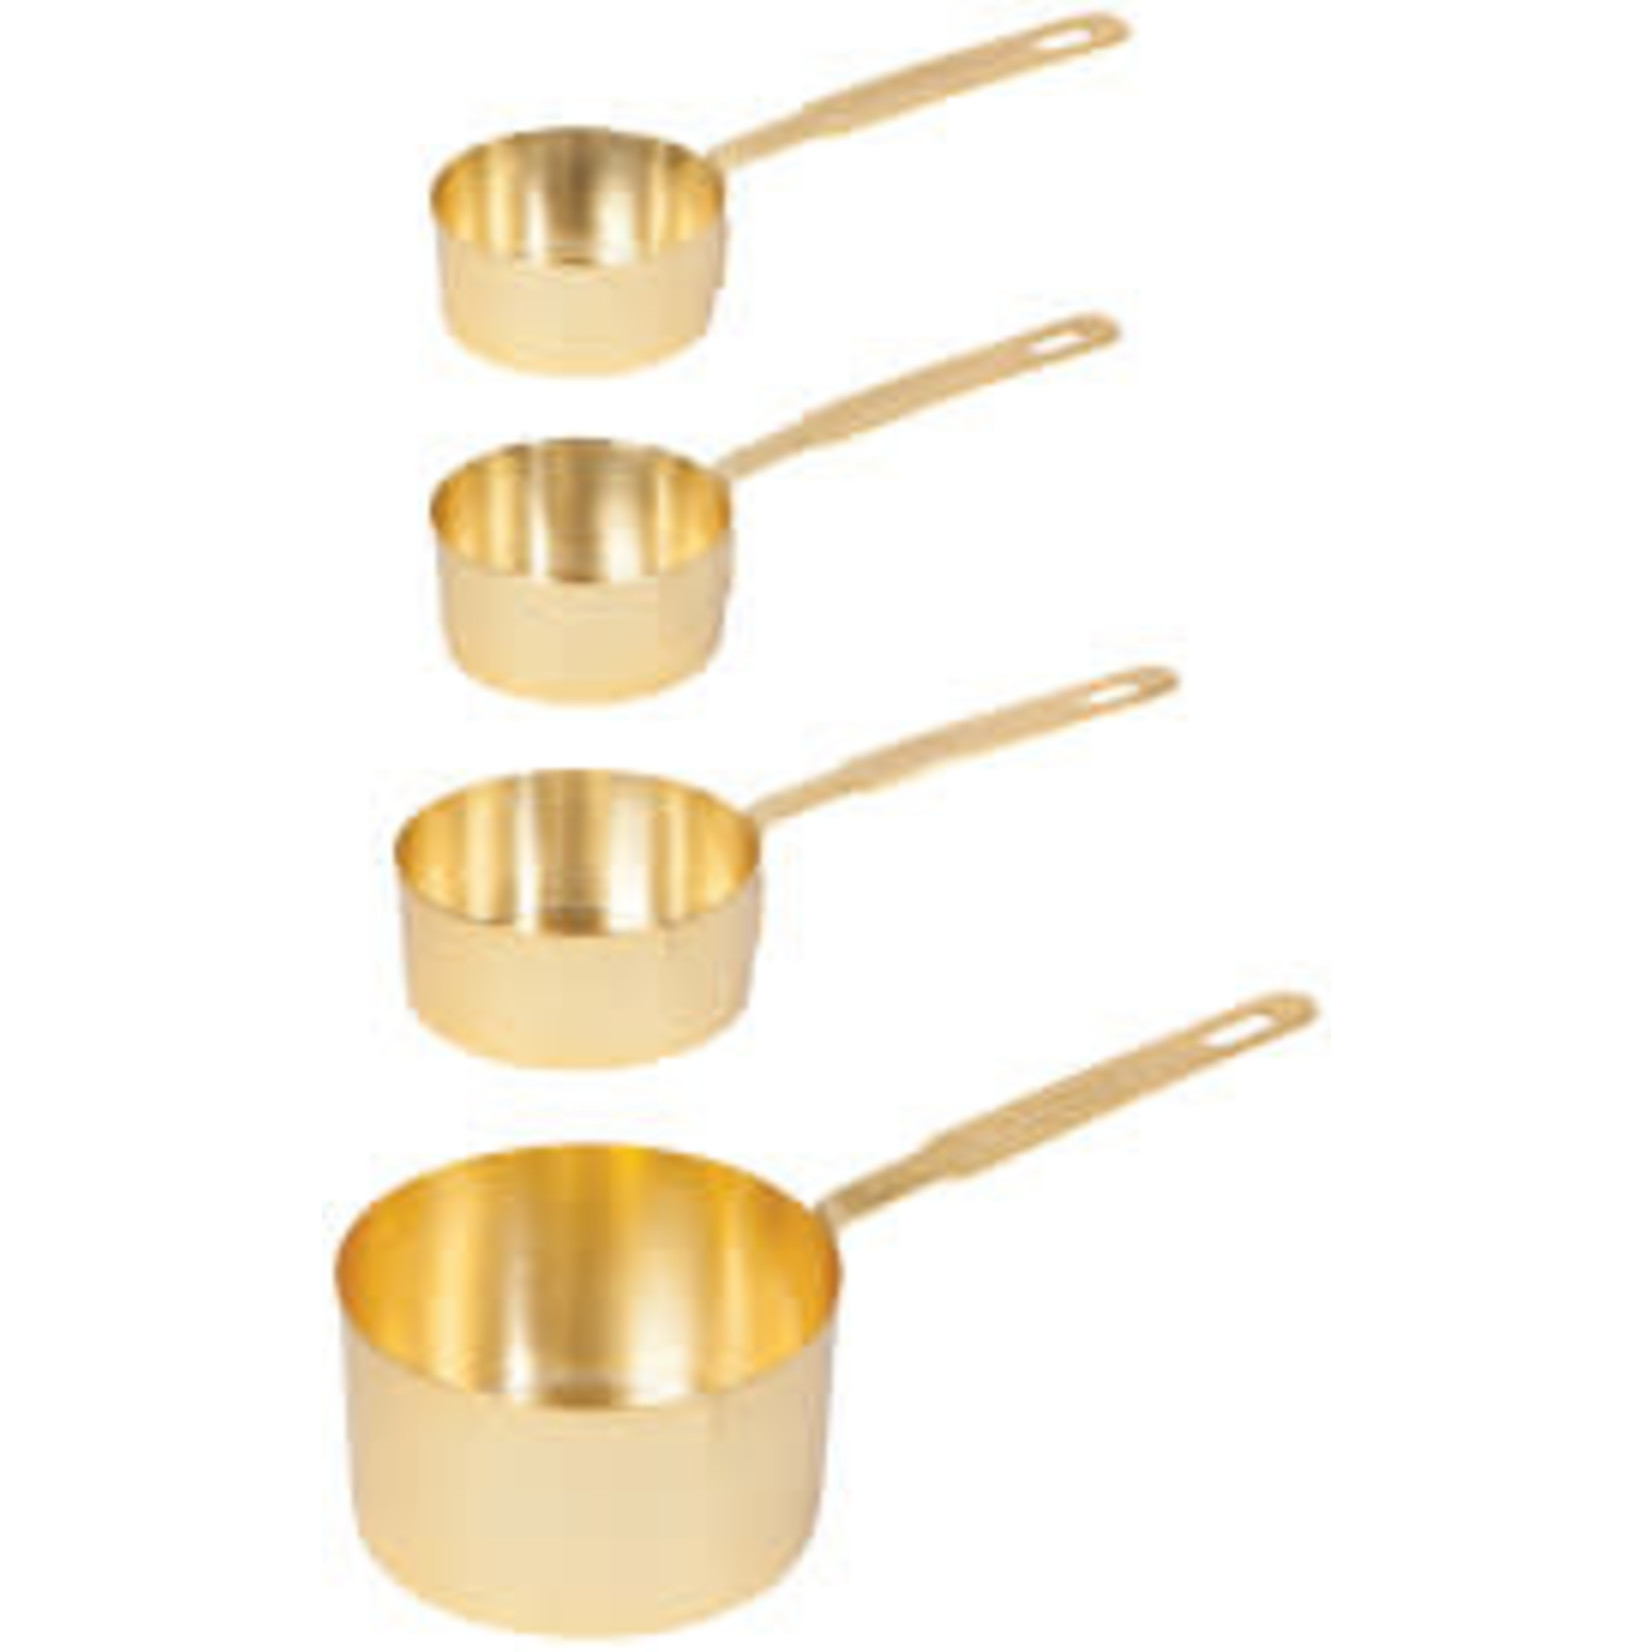 DANICA NOW DESIGNS Measuring Cups S/4 - Hammer Gold DNR